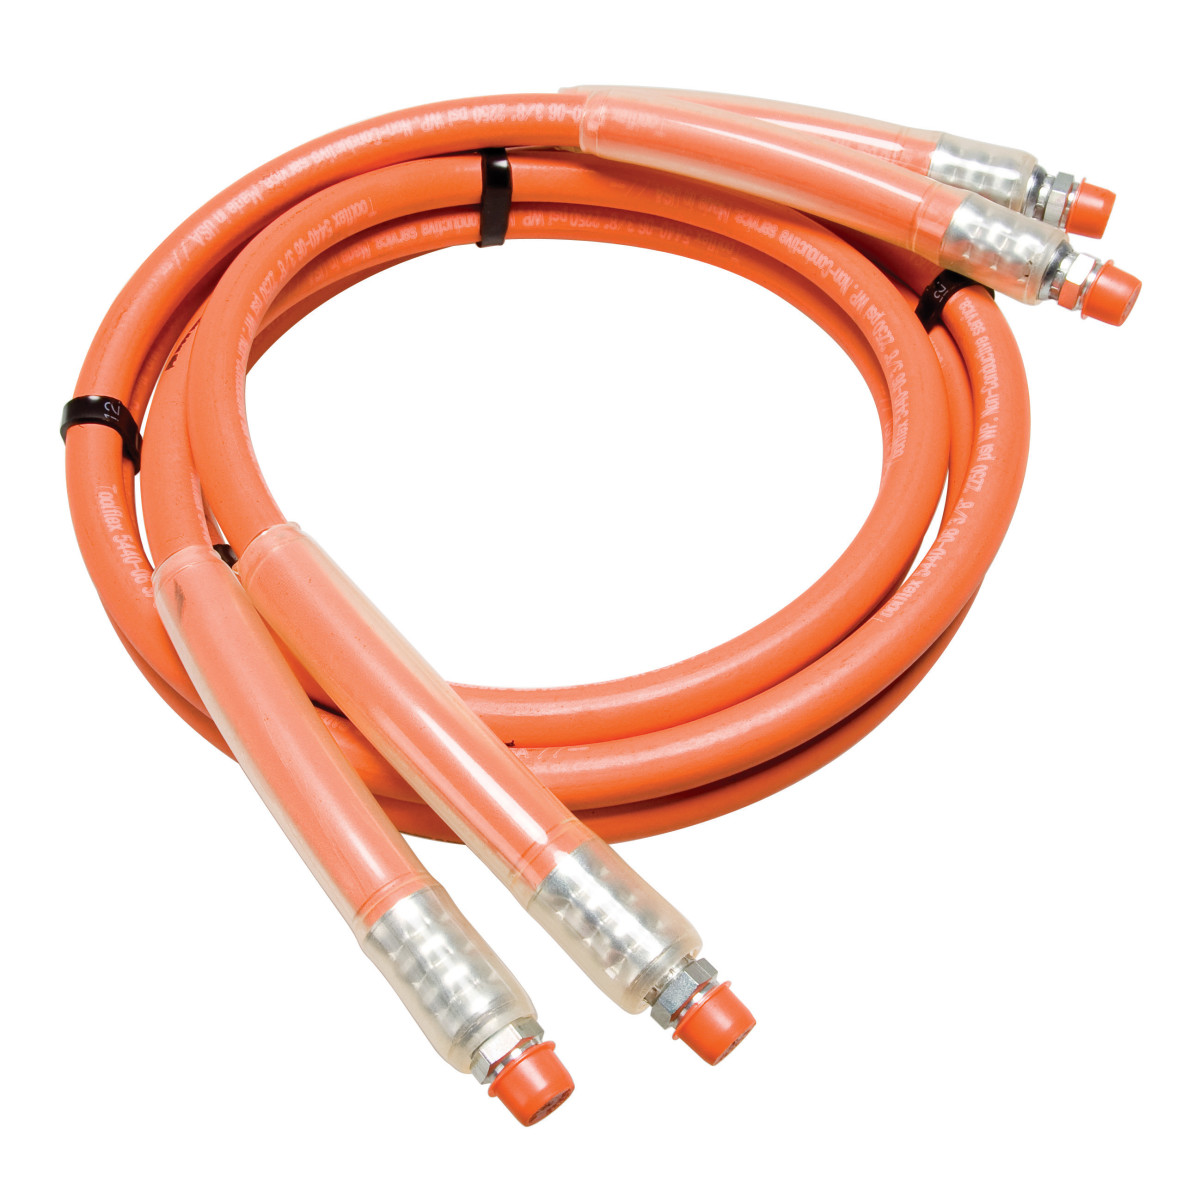 Two 3/8″ x 10” (10 mm x 3 m) I.D. Hoses with 3/8″ NPTF male fittings